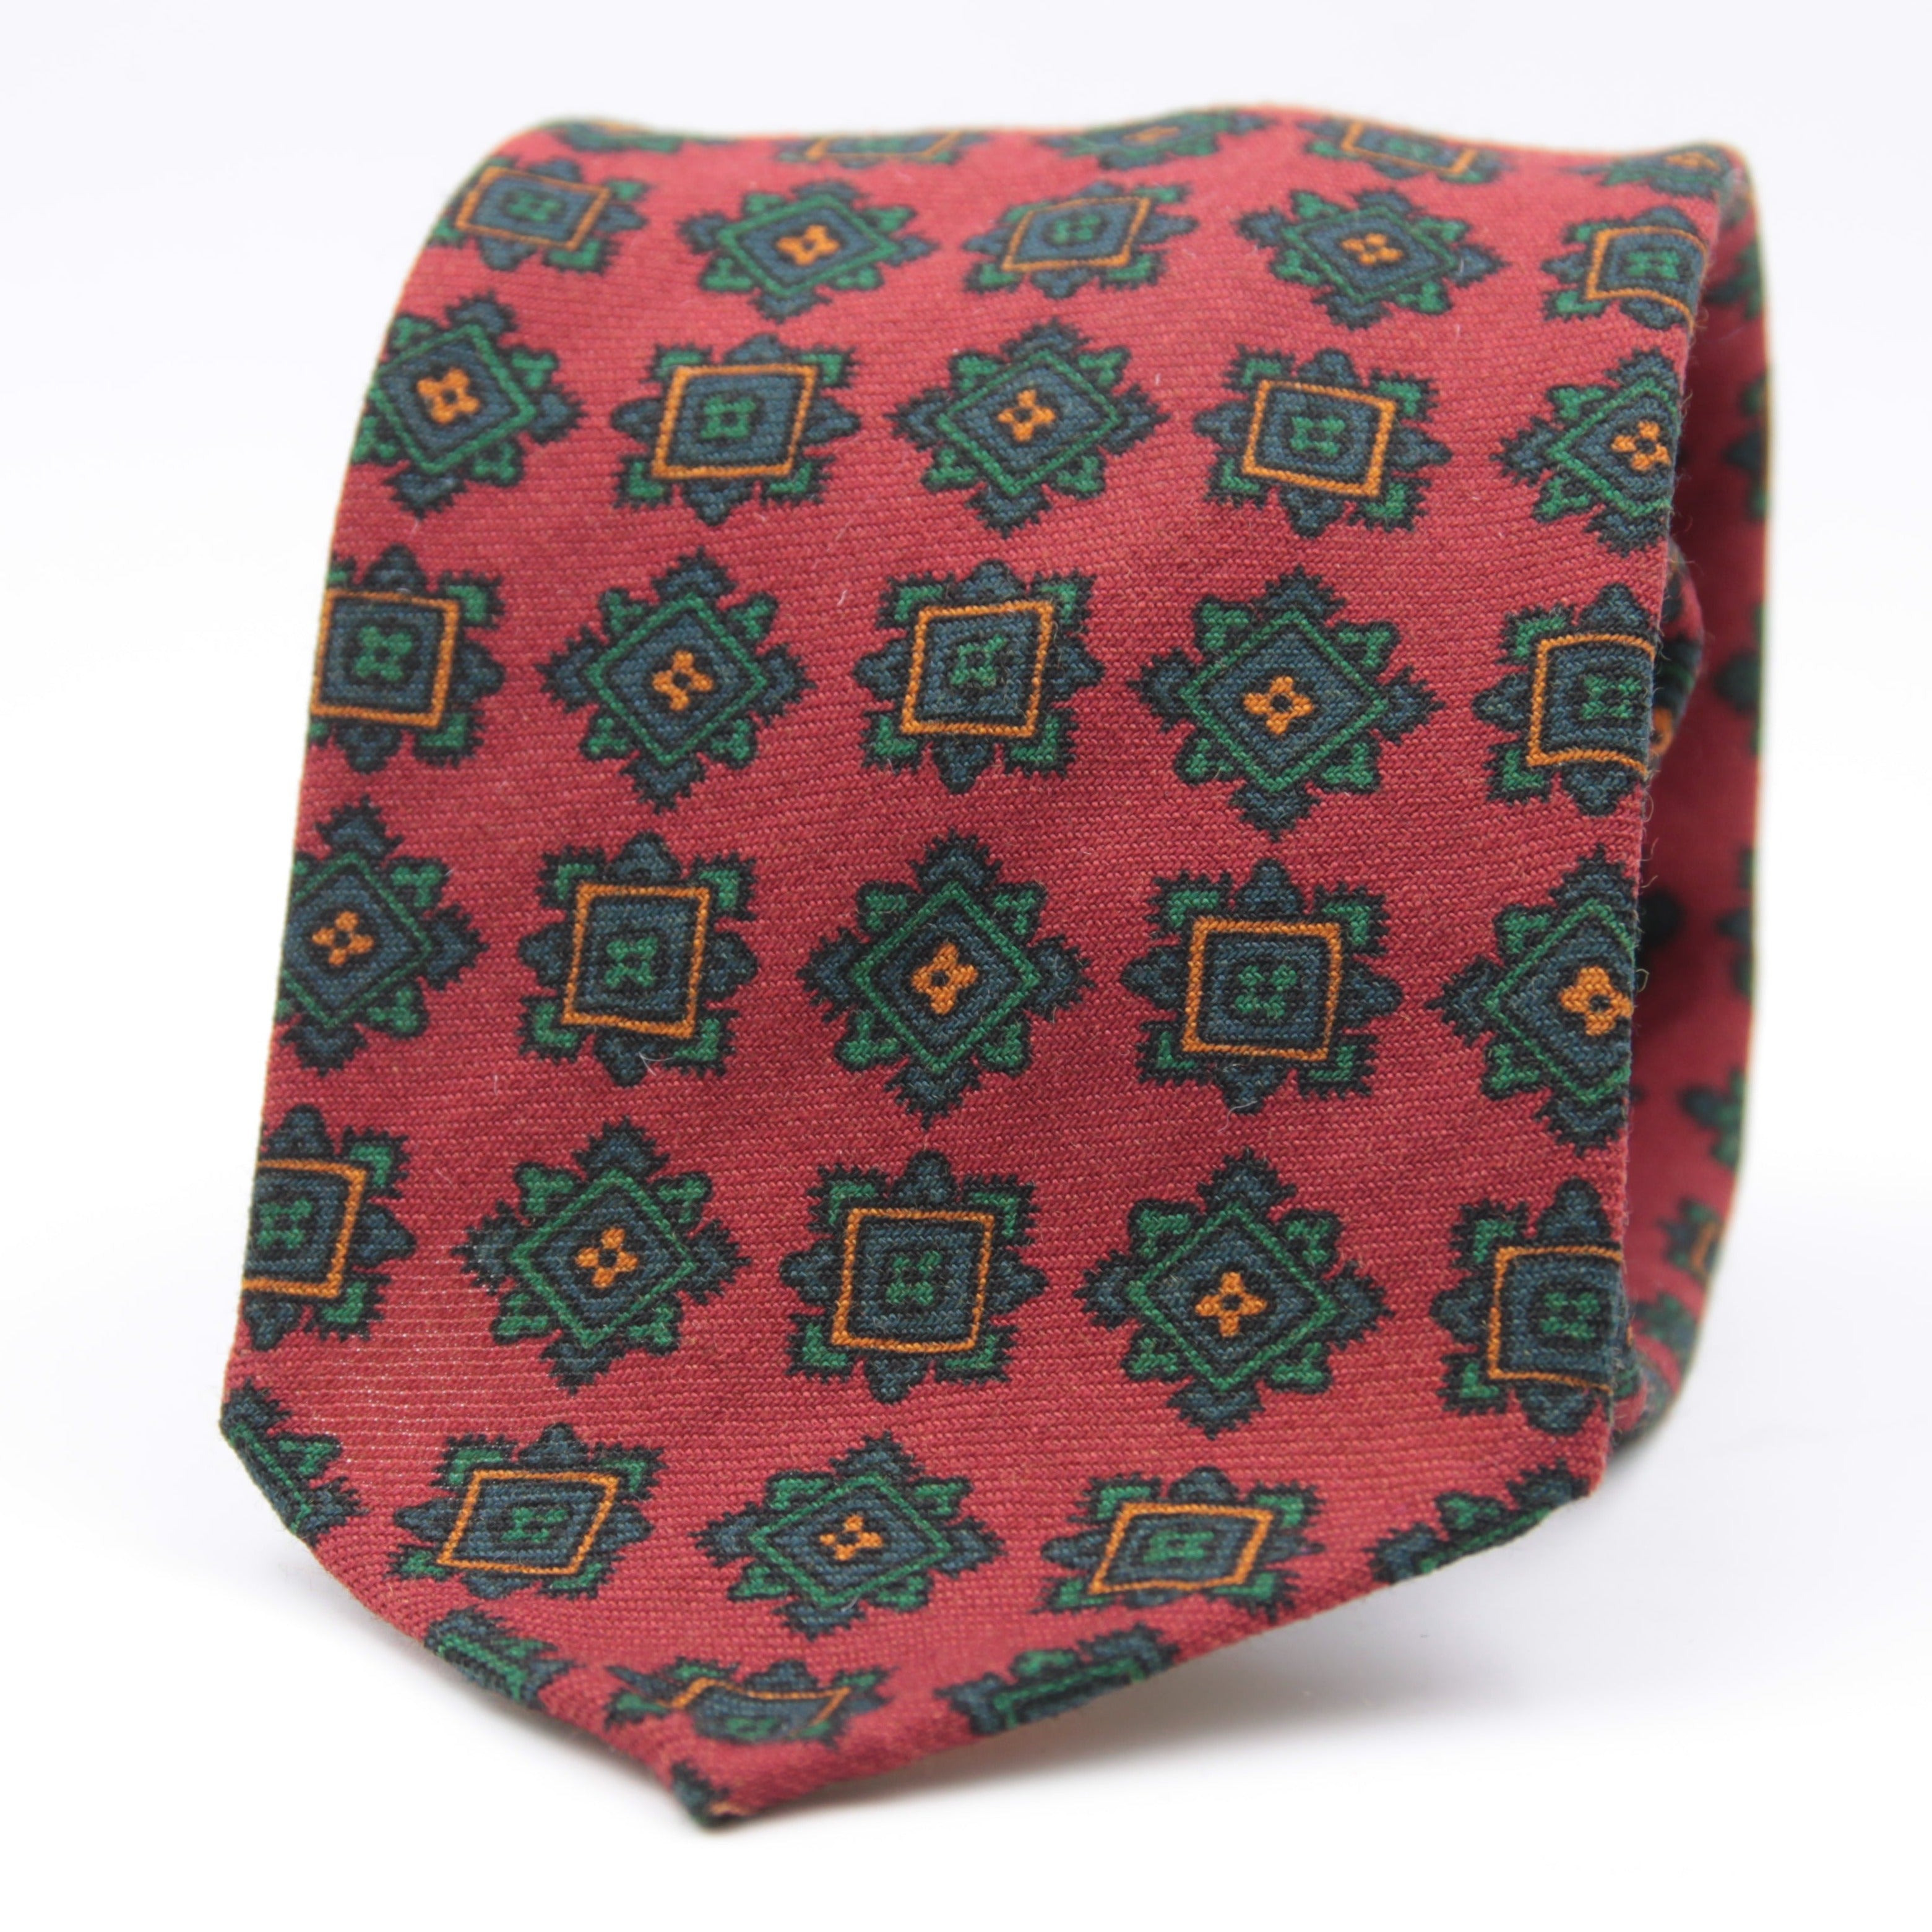 Cruciani & Bella 100%  Printed Wool  Unlined Hand rolled blades Red, Green and Orange Motif Tie Handmade in Italy 8 cm x 150 cm #5977